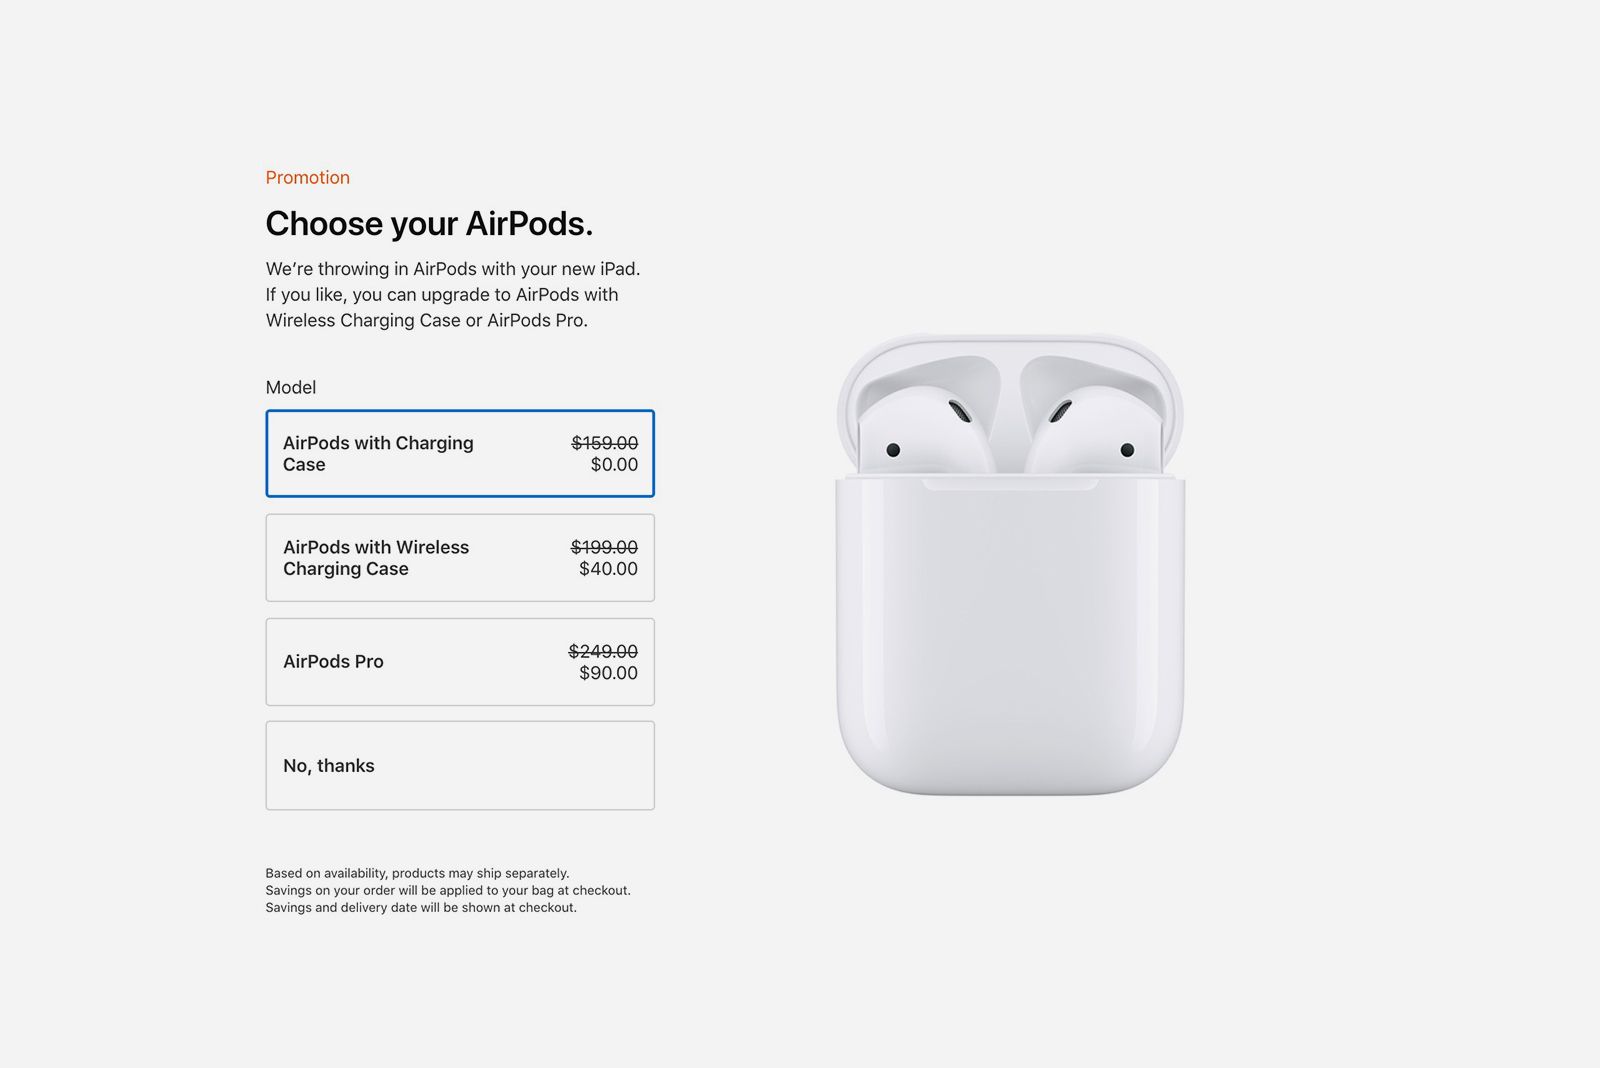 How To Get Free Airpods When You Buy A New Macbook Or Ipad image 2